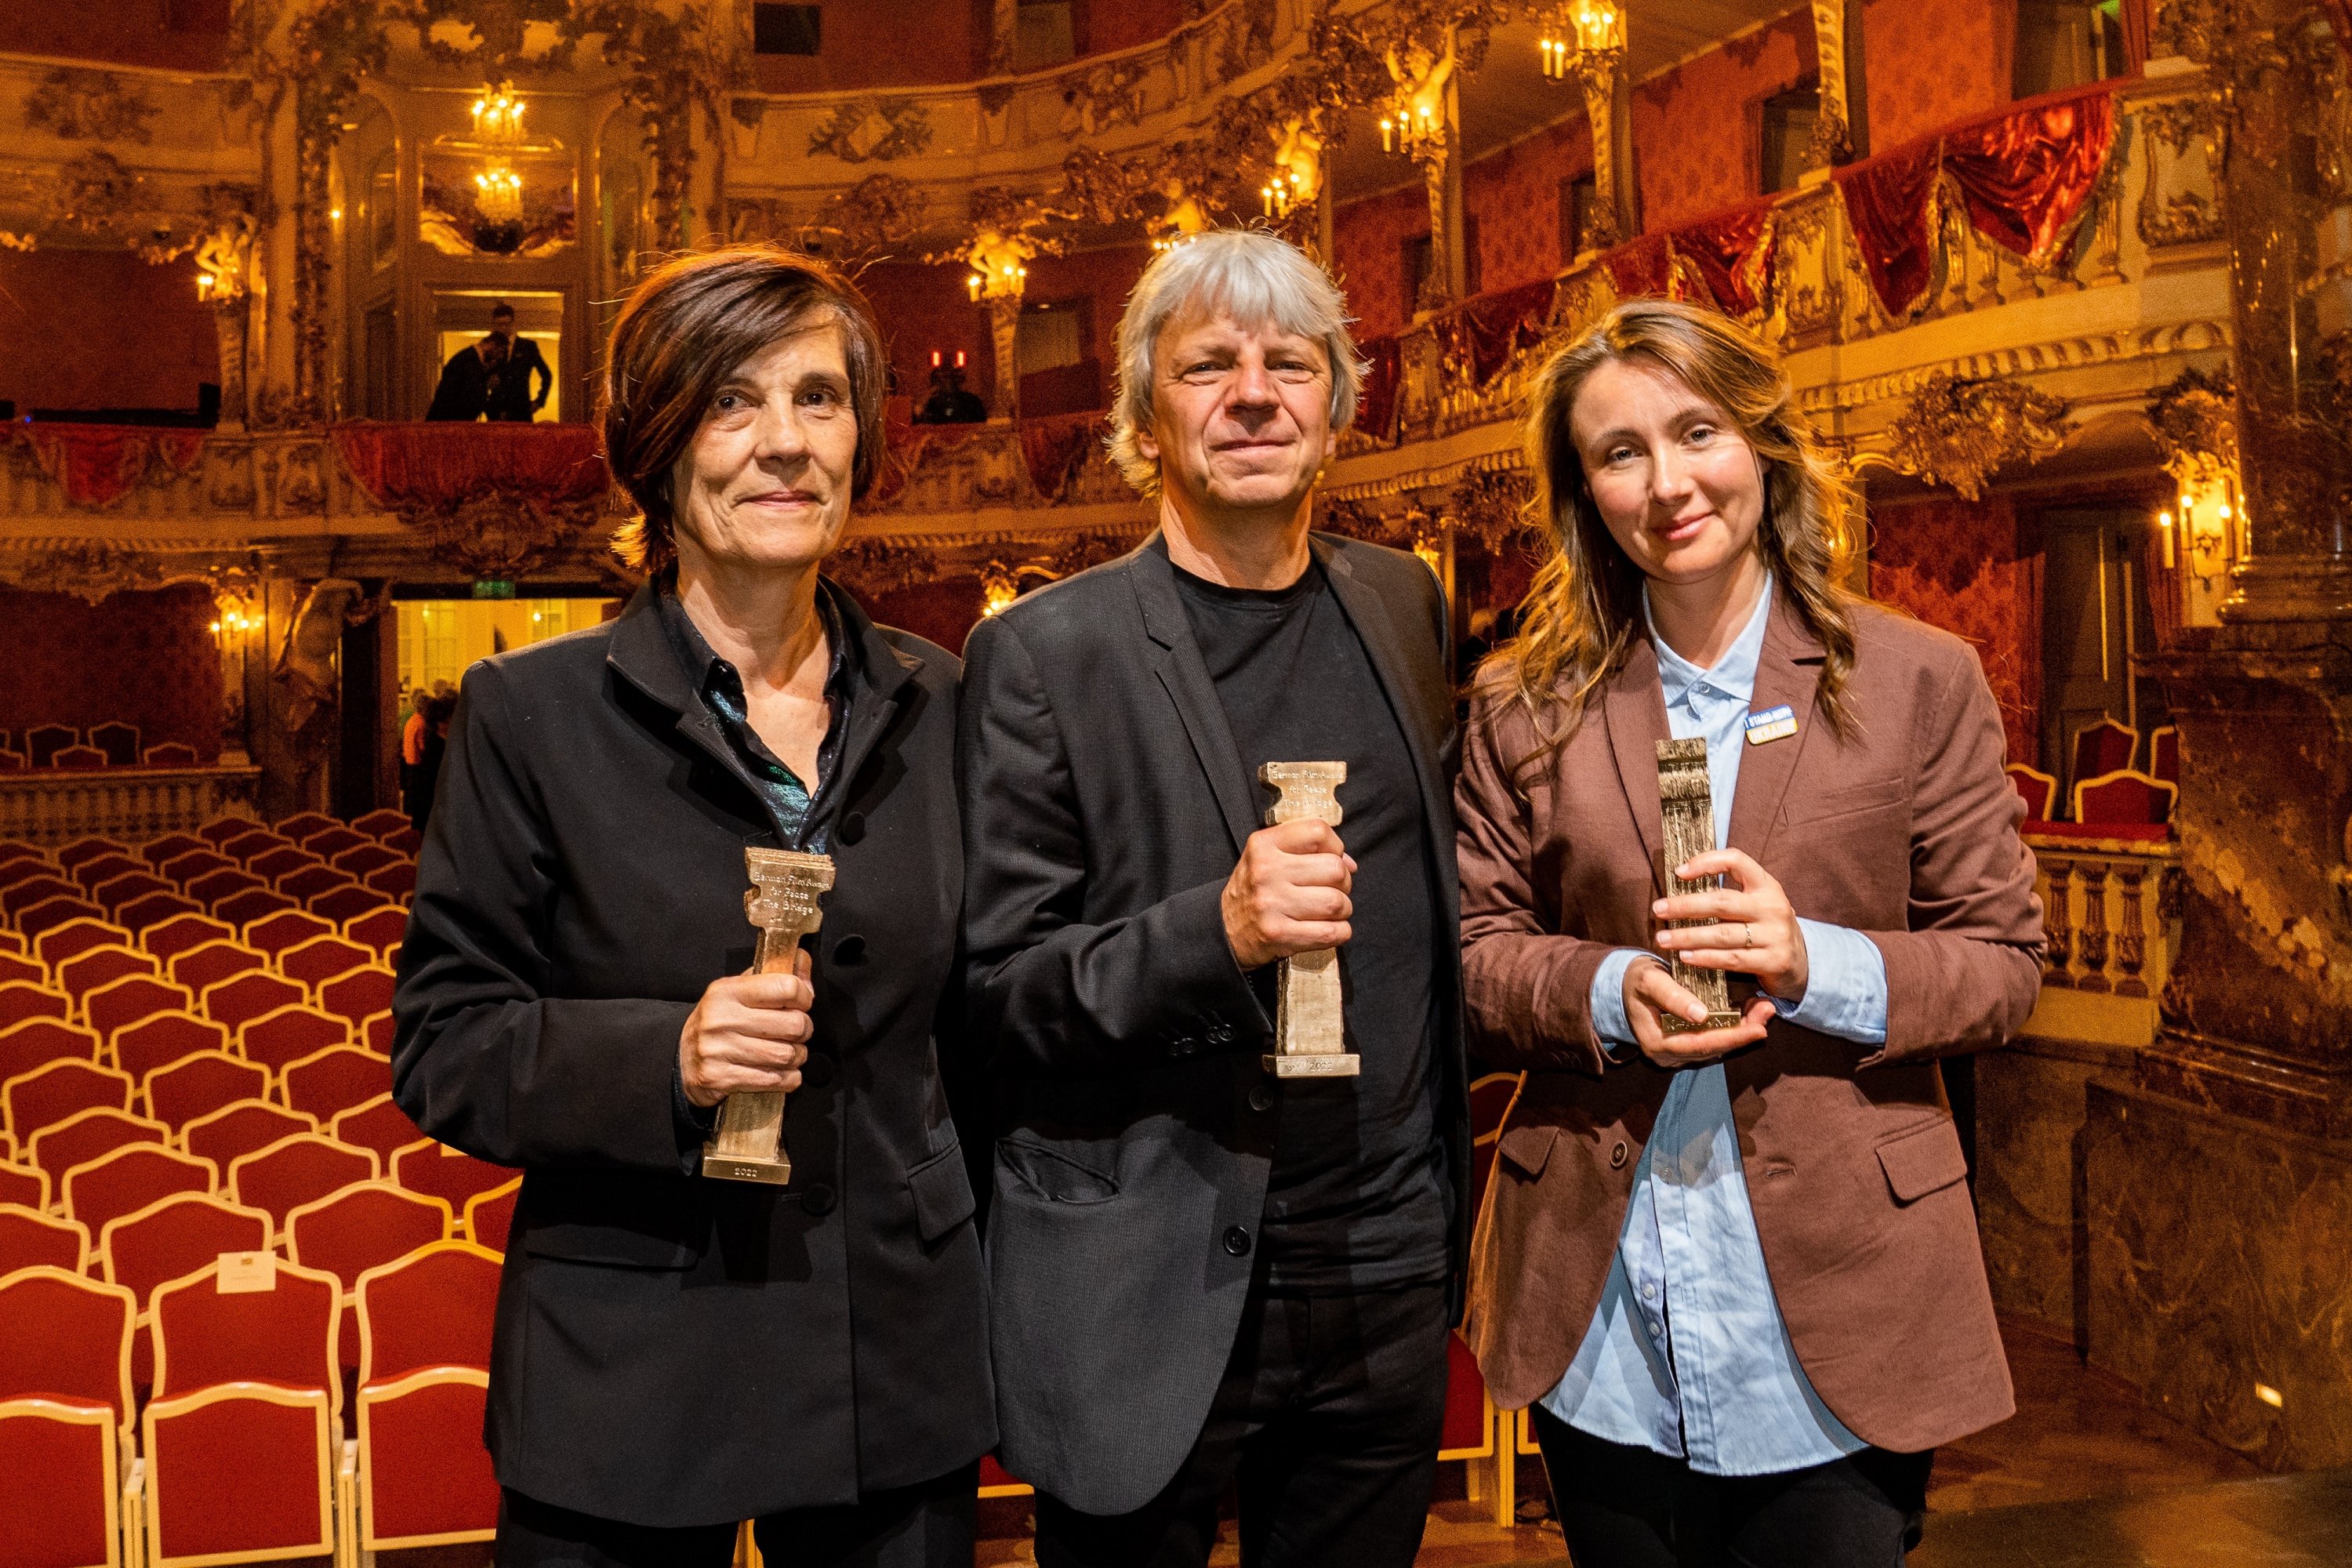 Maryna Er Gorbach (R) poses with other winners of the 21st German Film Award for Peace – The Bridge.